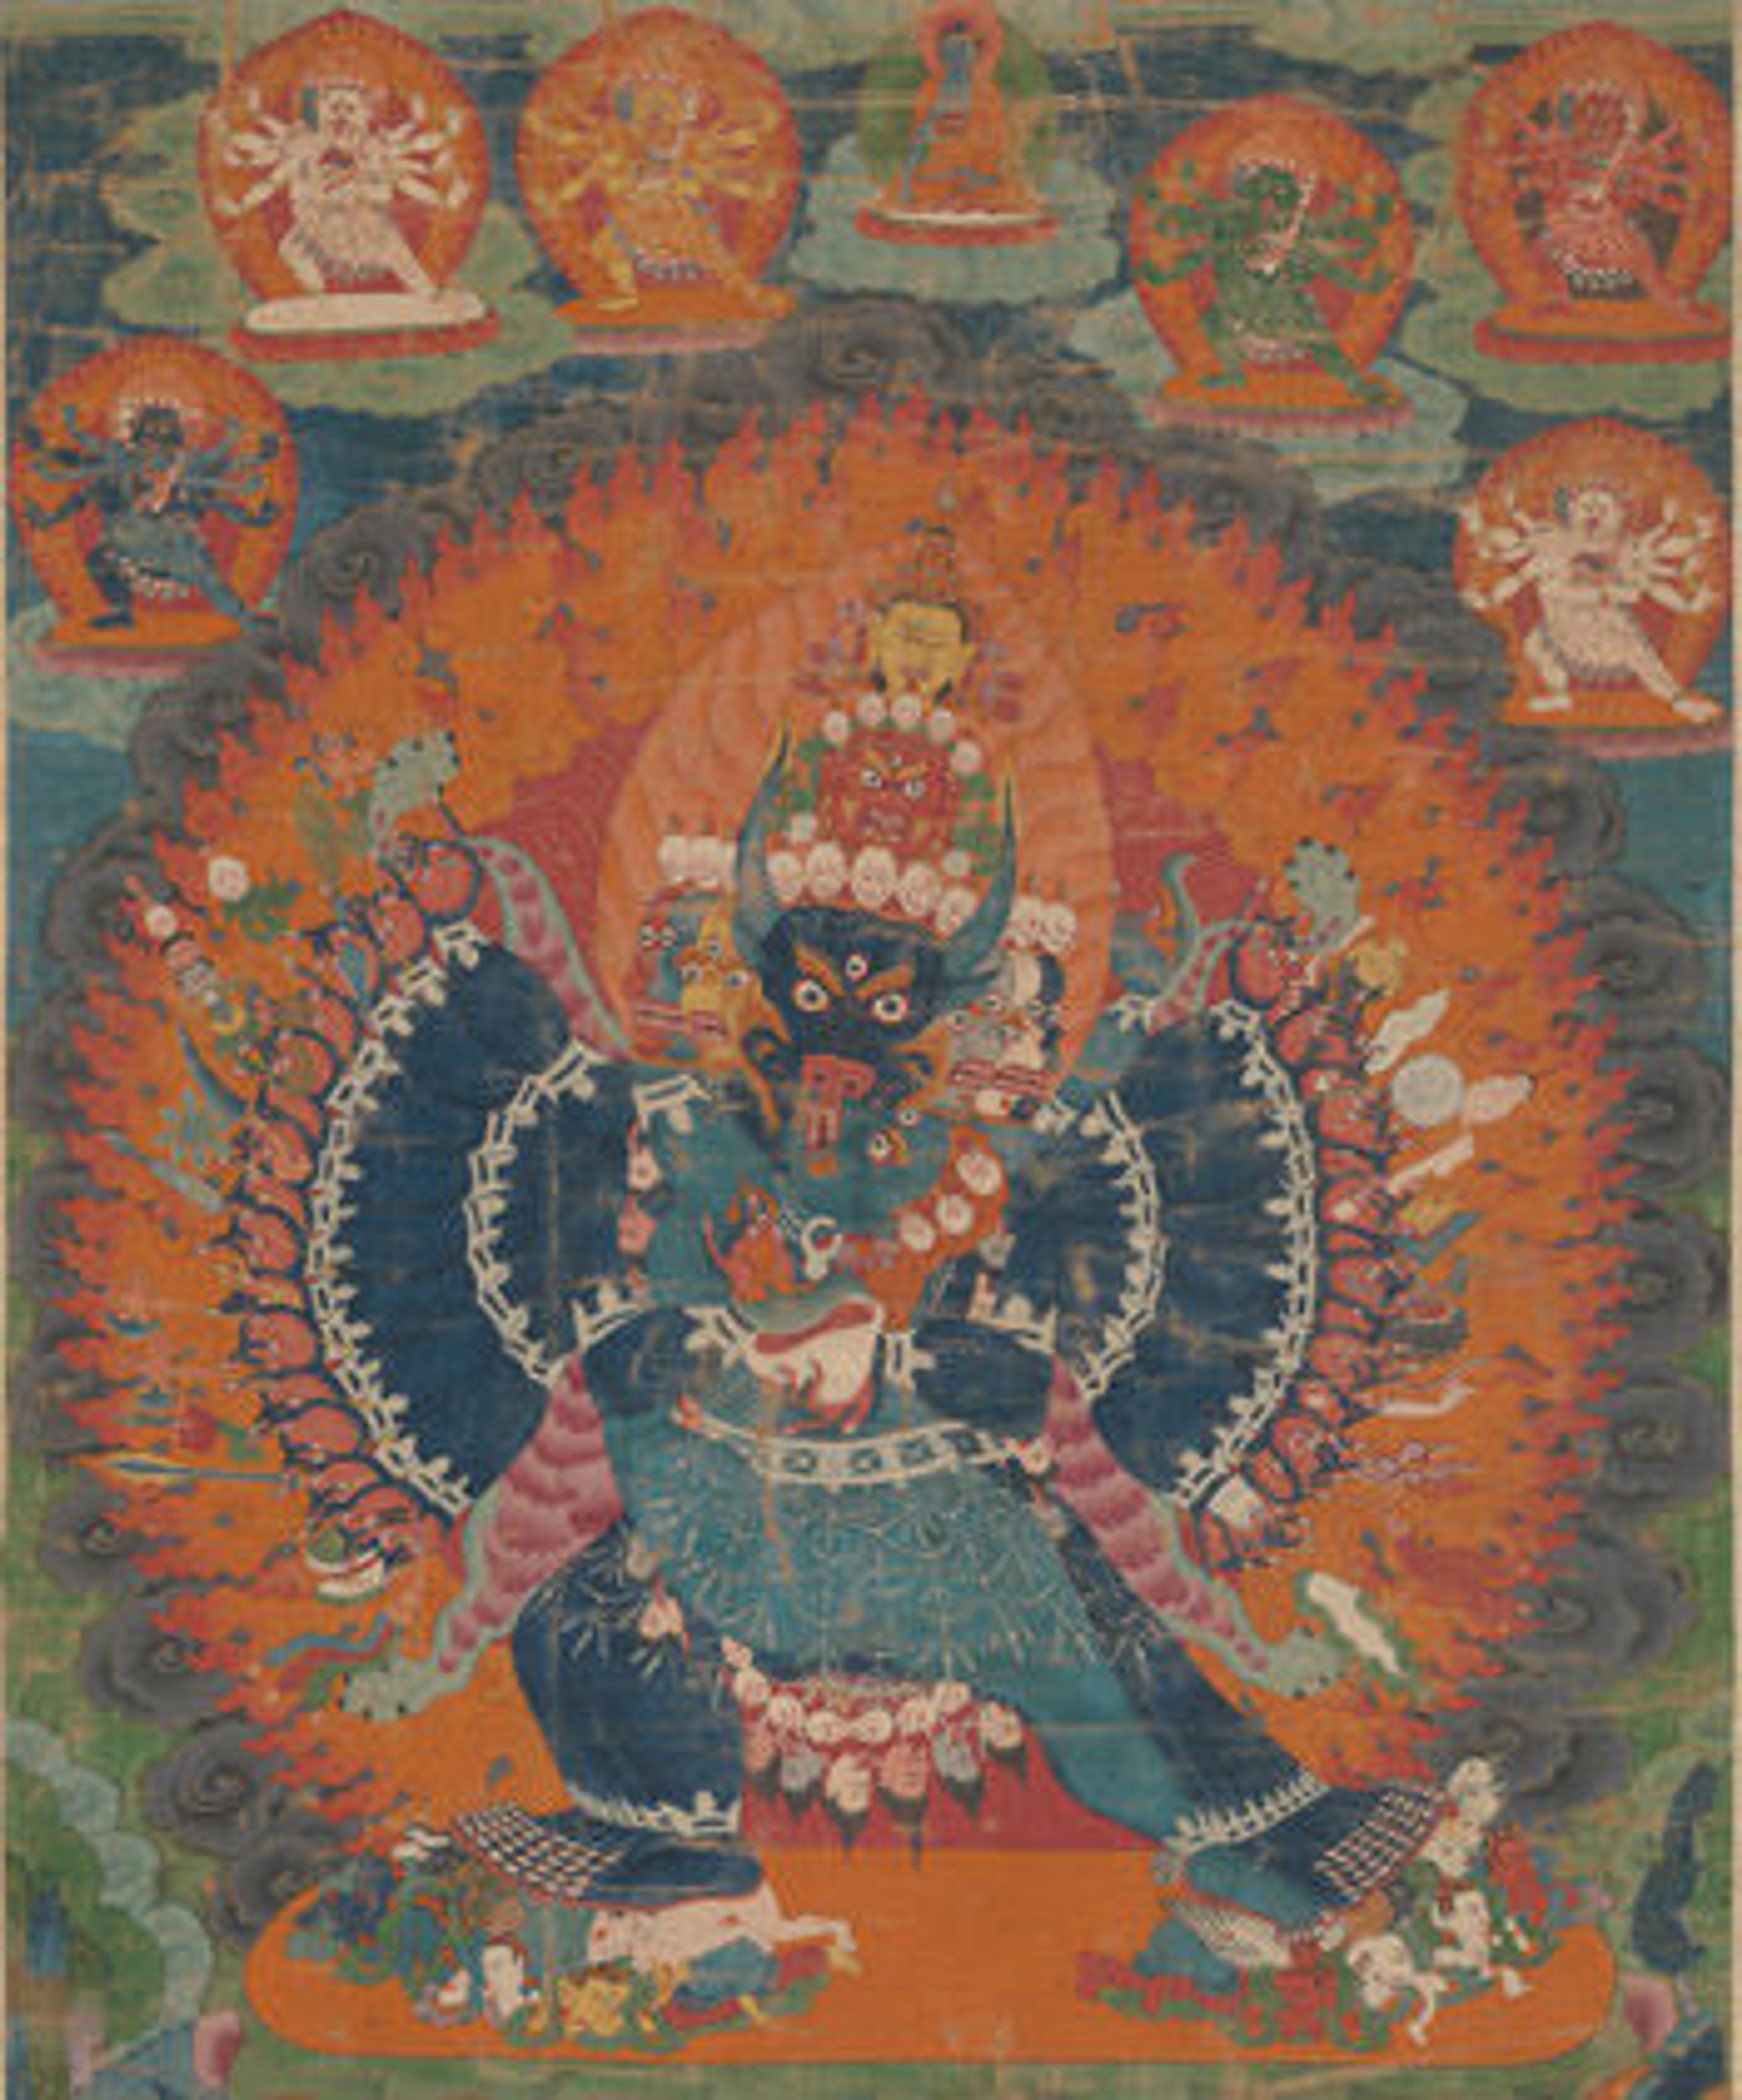 Vajrabhairava with His Consort Vajravetali, 18th century. Tibet. Distemper on cloth; Overall with mounting: 56 x 25 1/2 in. (142.2 x 64.8 cm) Image: 33 15/16 x 20 1/4 in. (86.2 x 51.4 cm) Framed: 51 1/2 x 29 1/2 x 1 1/8 in. (130.8 x 74.9 x 2.9 cm). The Metropolitan Museum of Art, New York, Gift of Mrs. W. de Forest, 1931 (31.128.3)